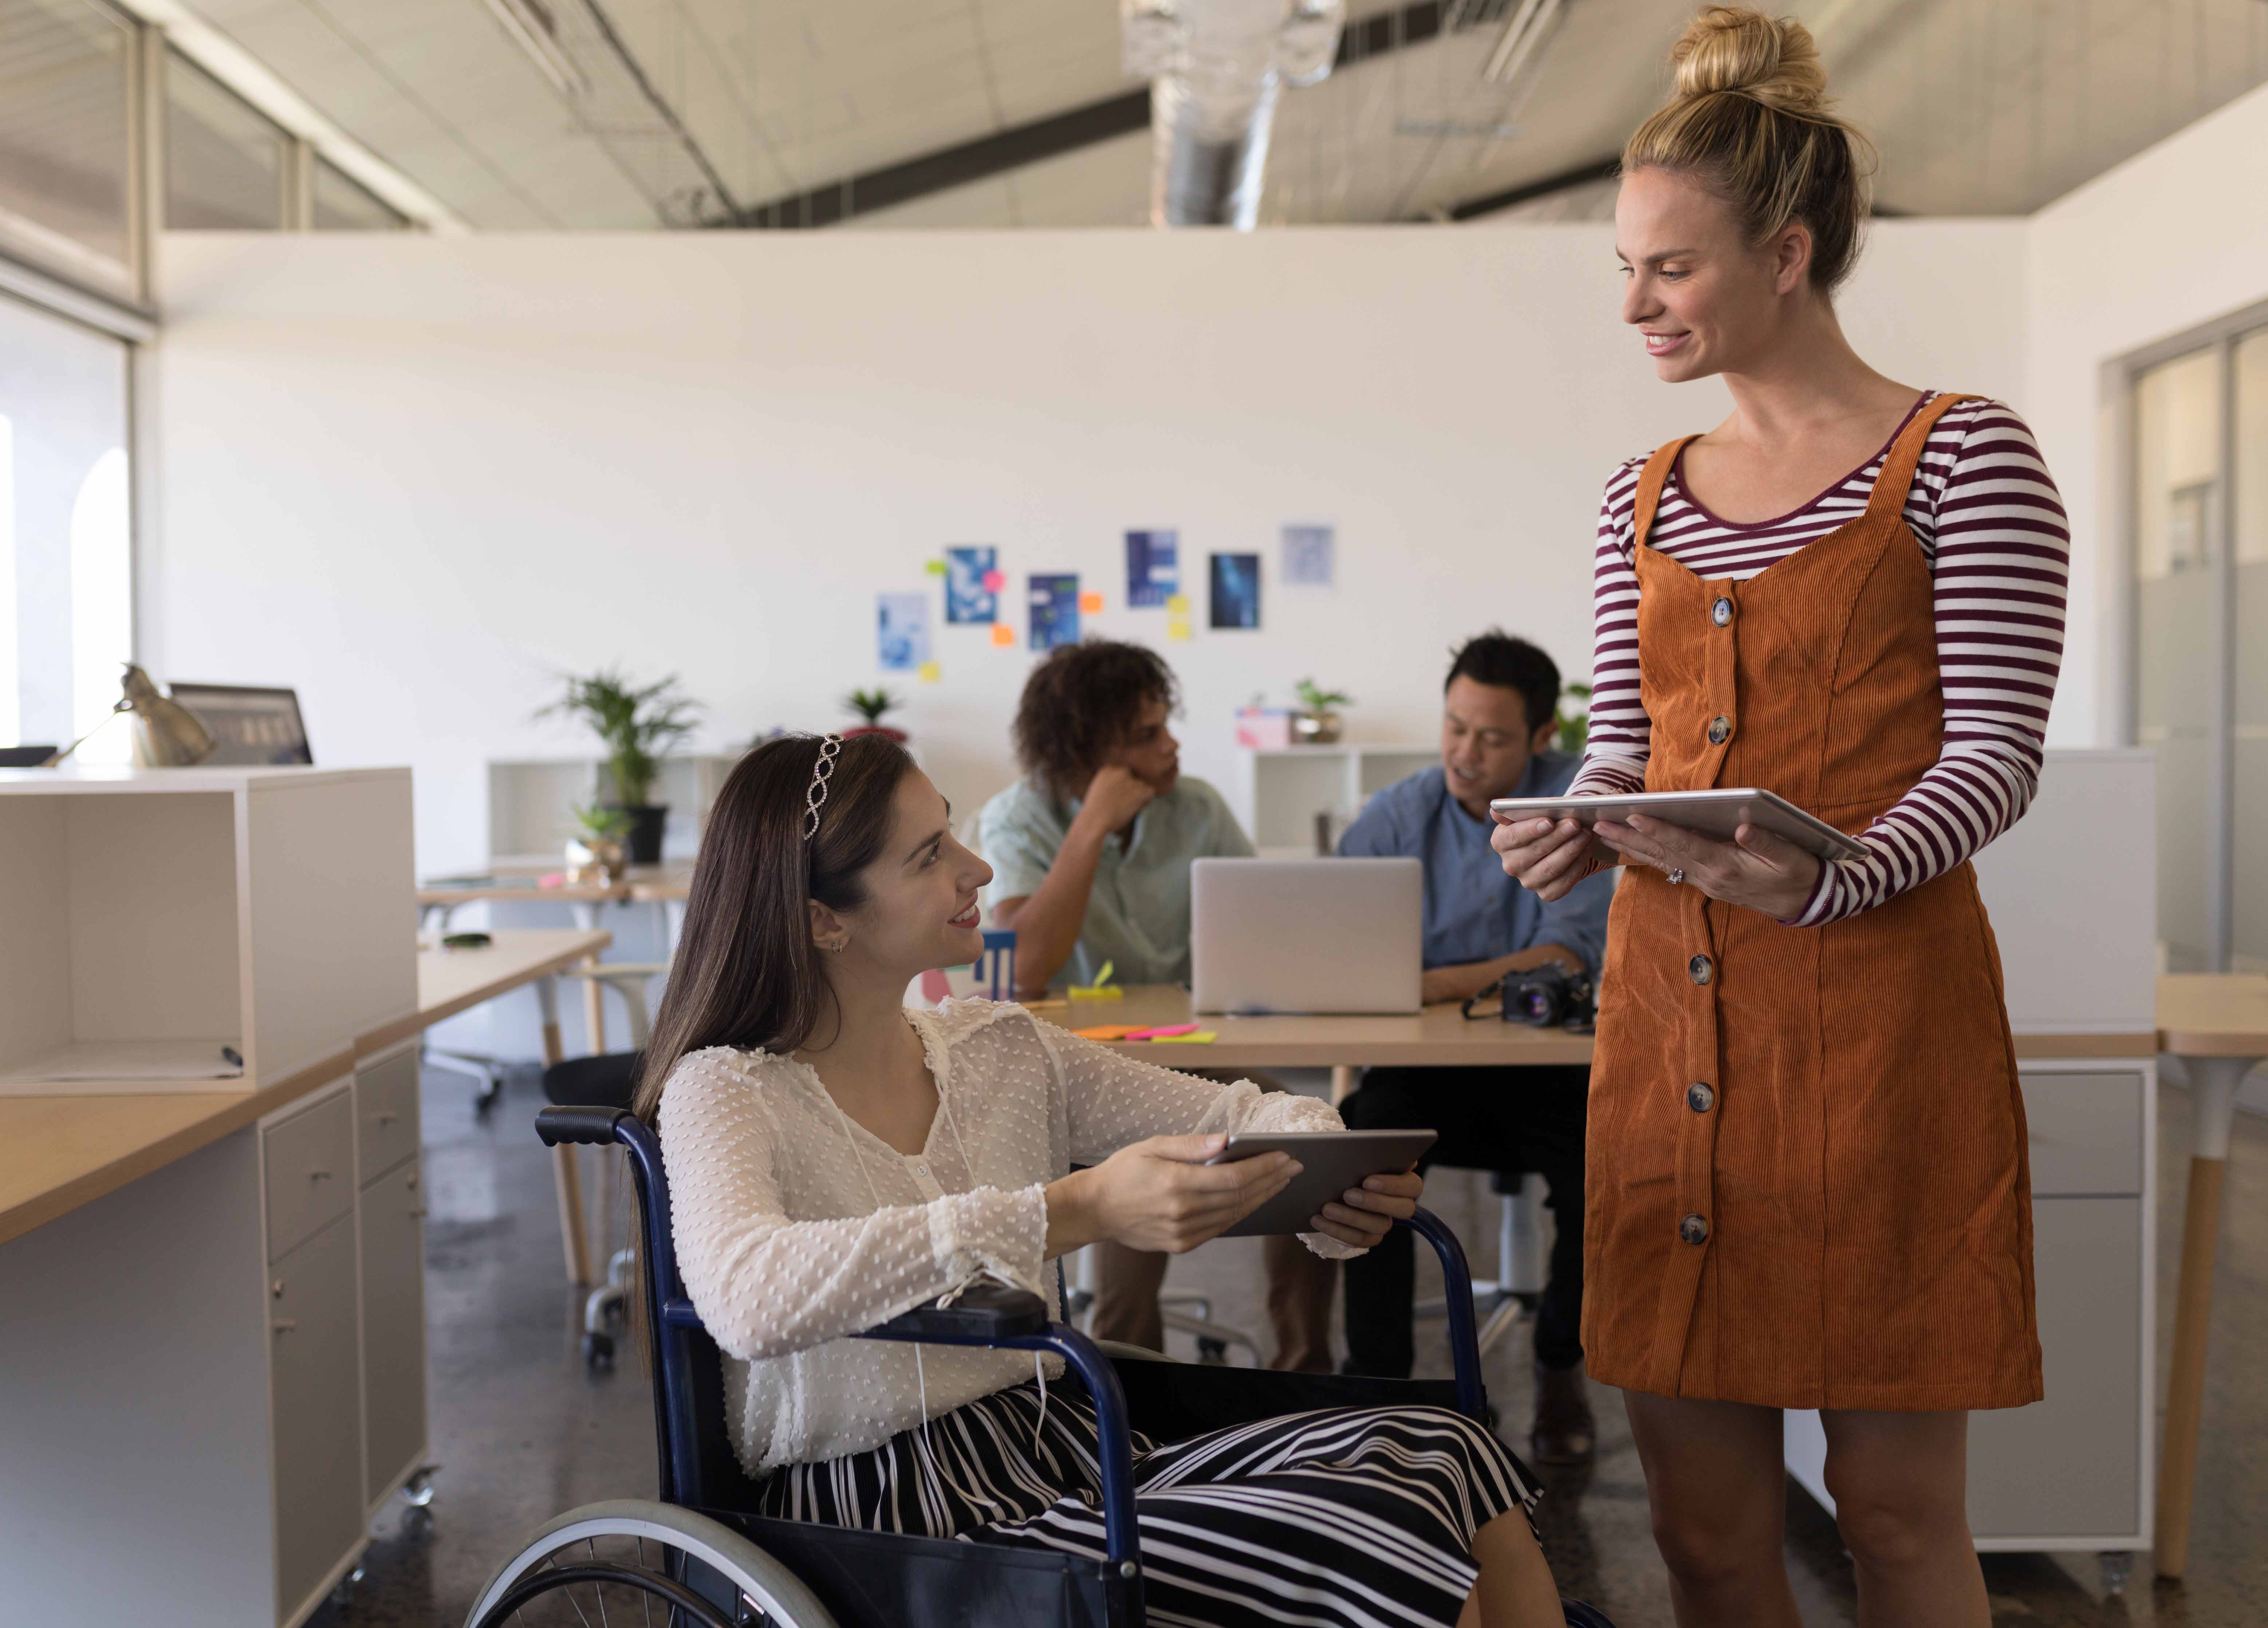 Woman with disabilities interacting with her casually dressed coworker in office